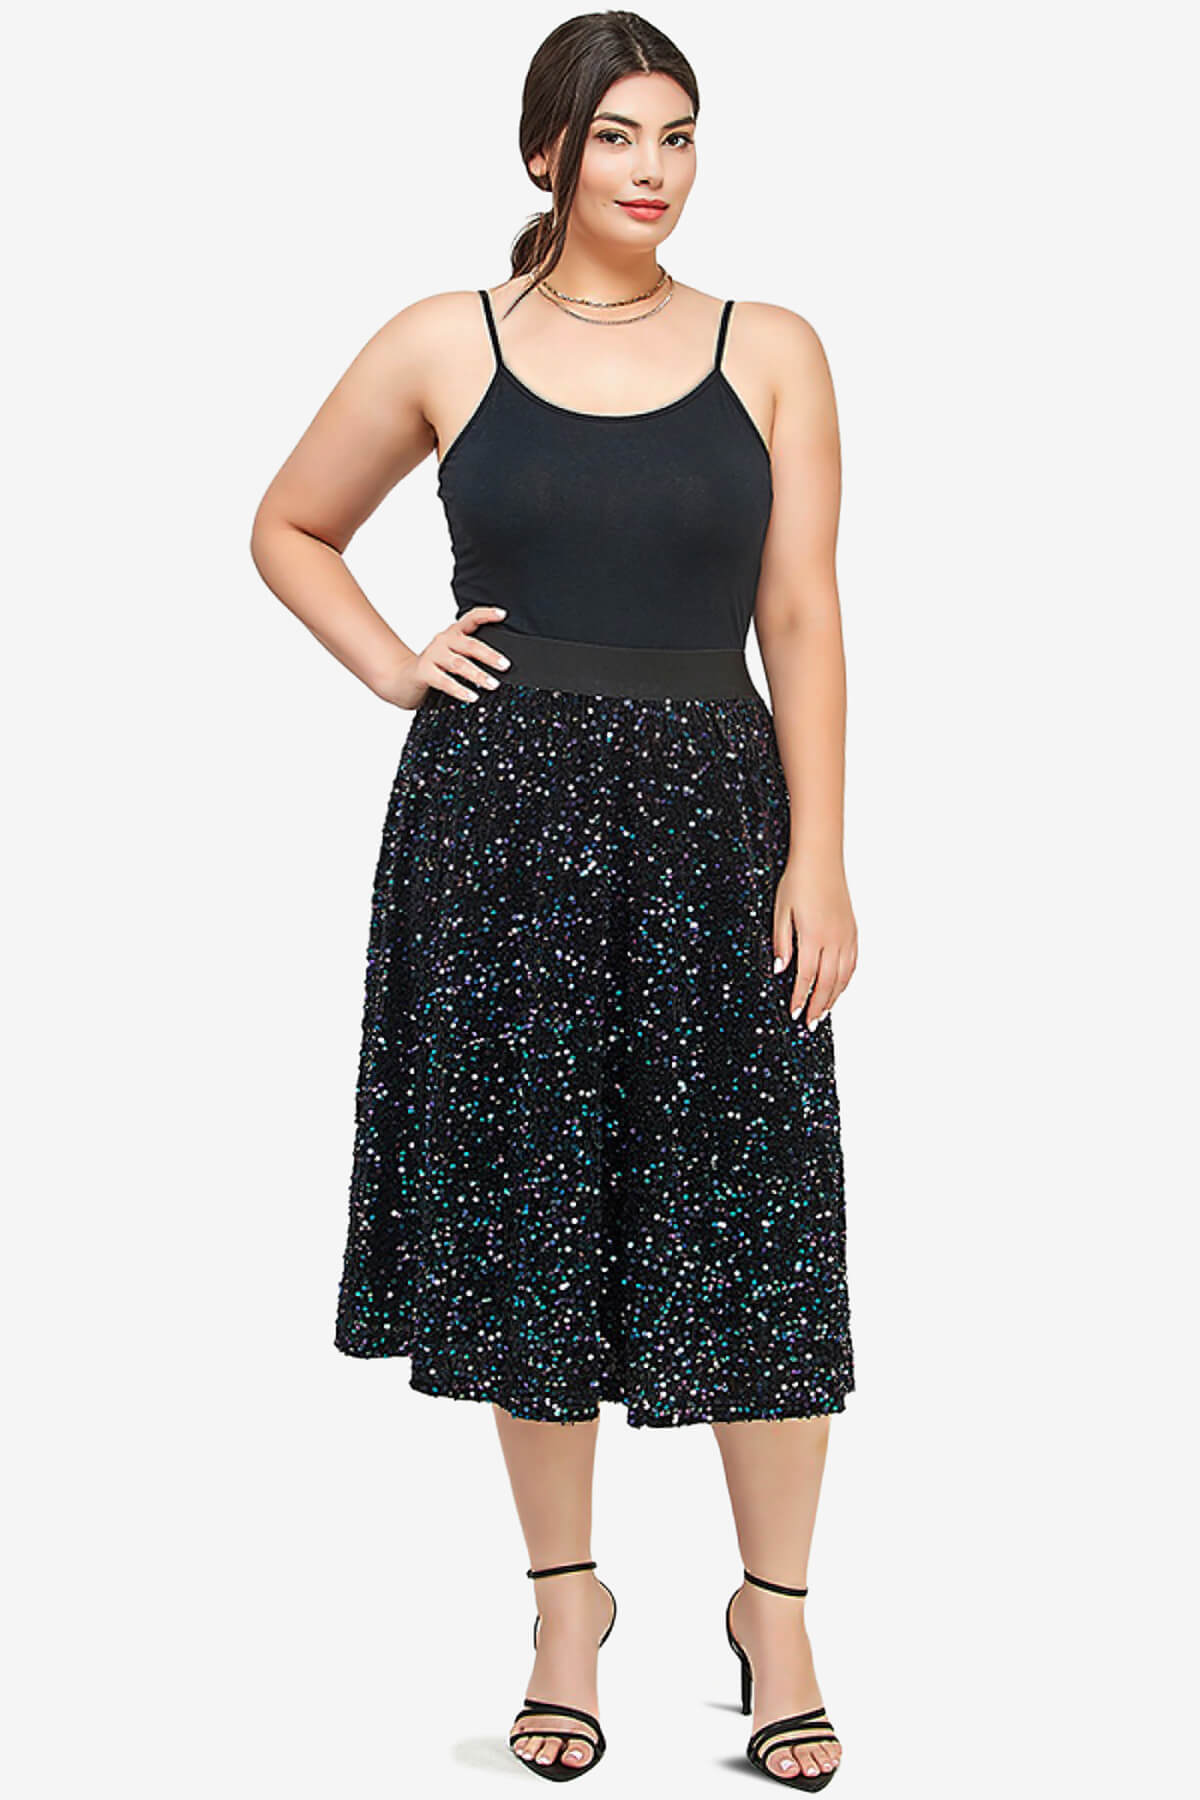 Sequins Knit Pull-On Pencil Skirt - Addition Elle